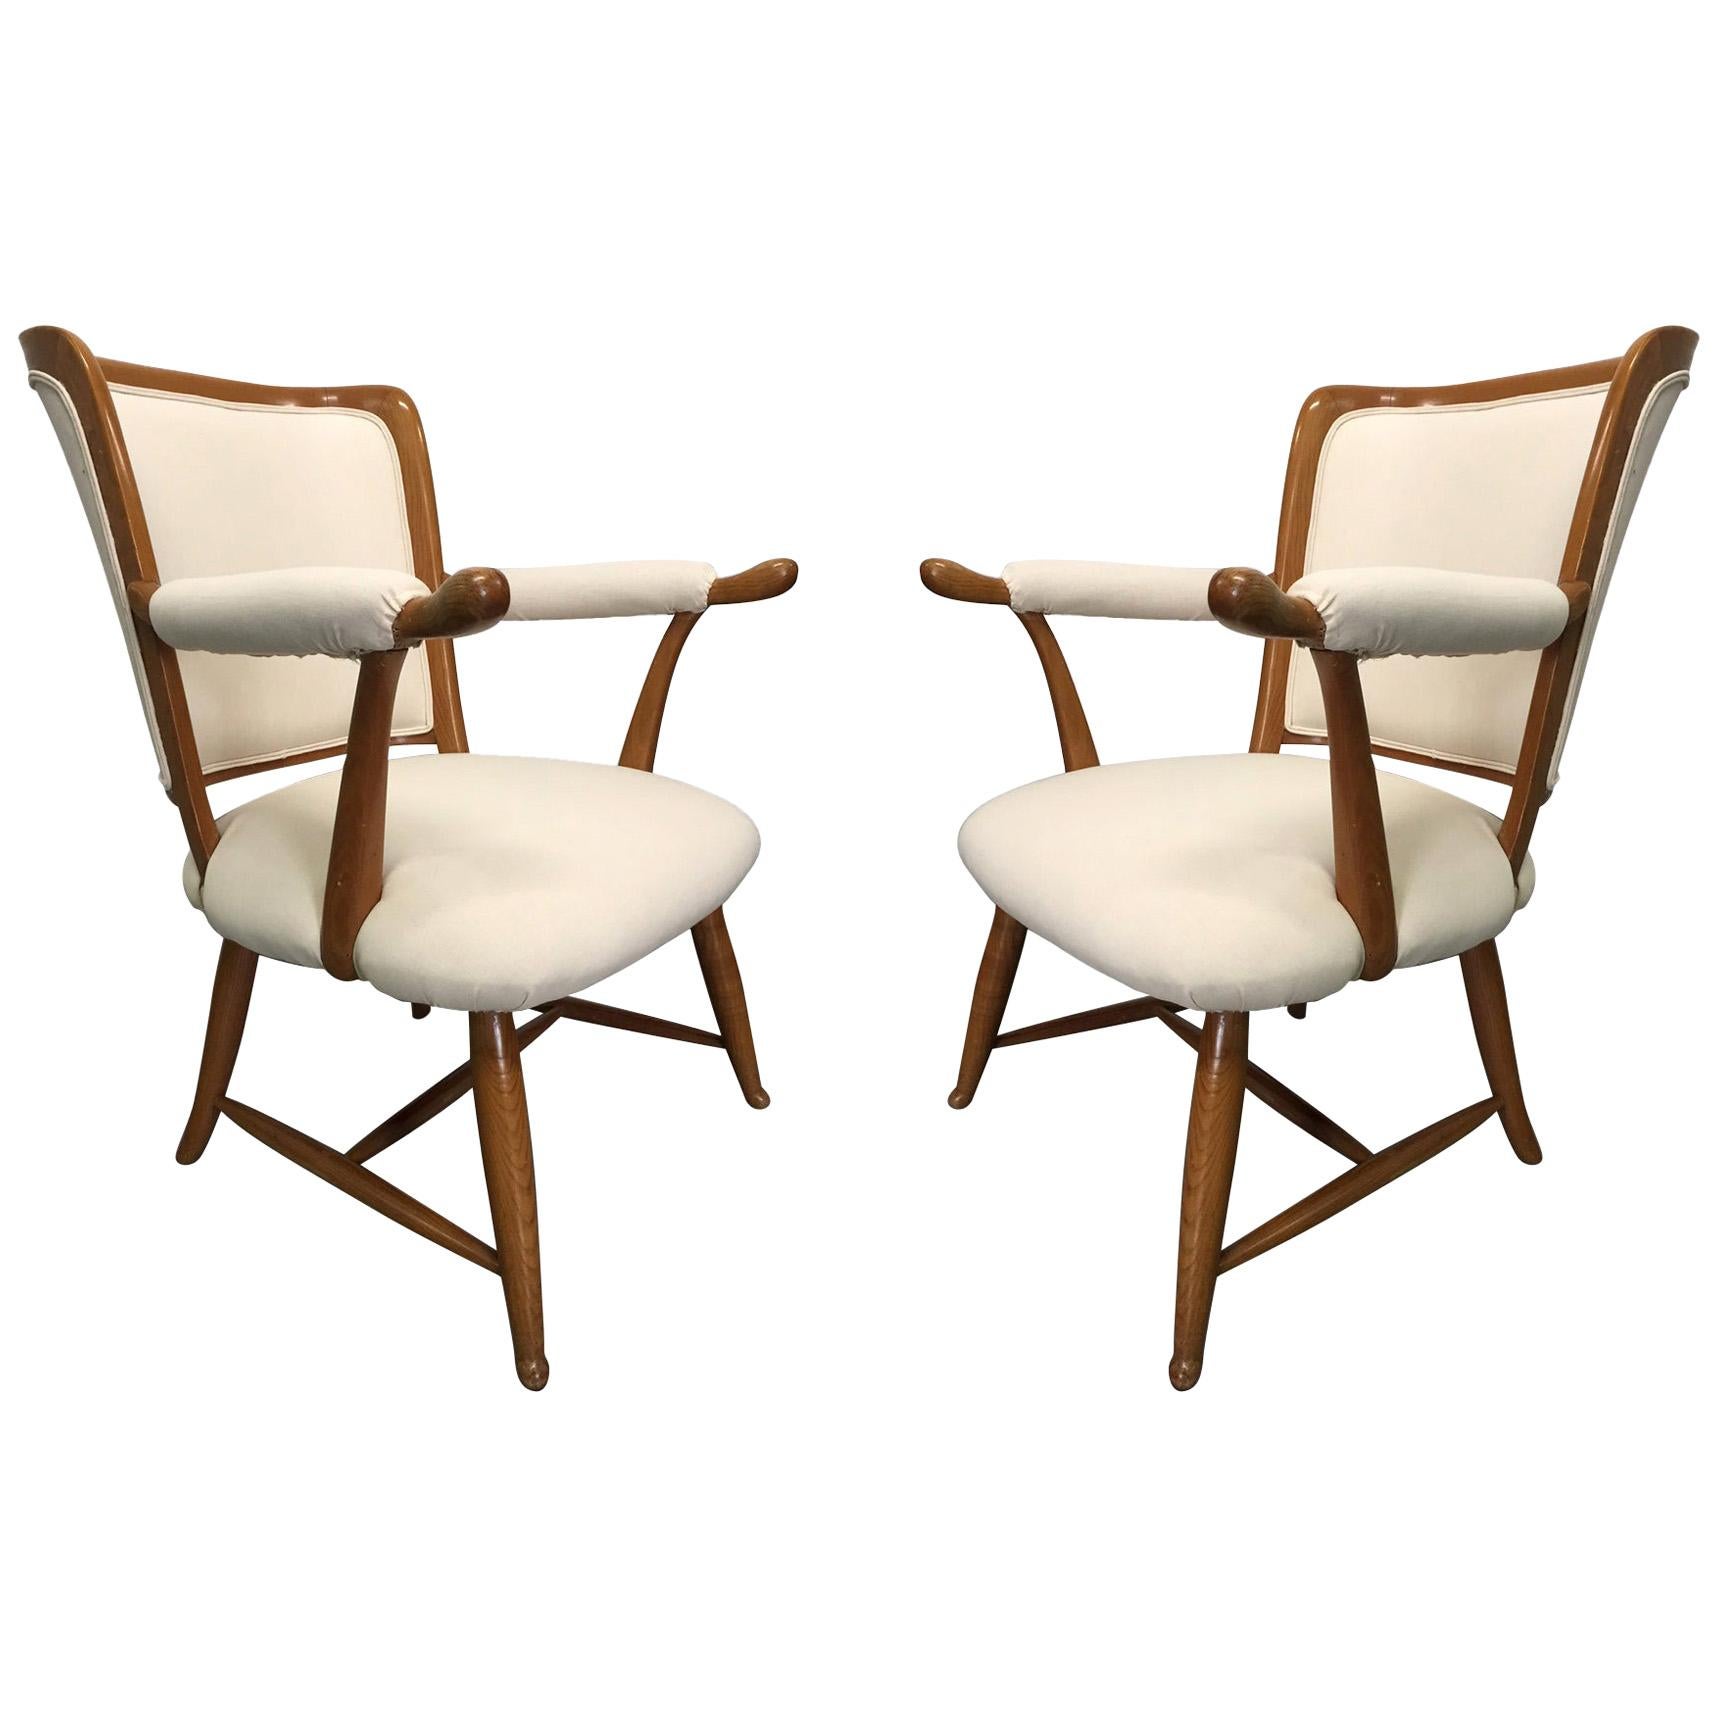 Pair of 1950s French Country Armchairs